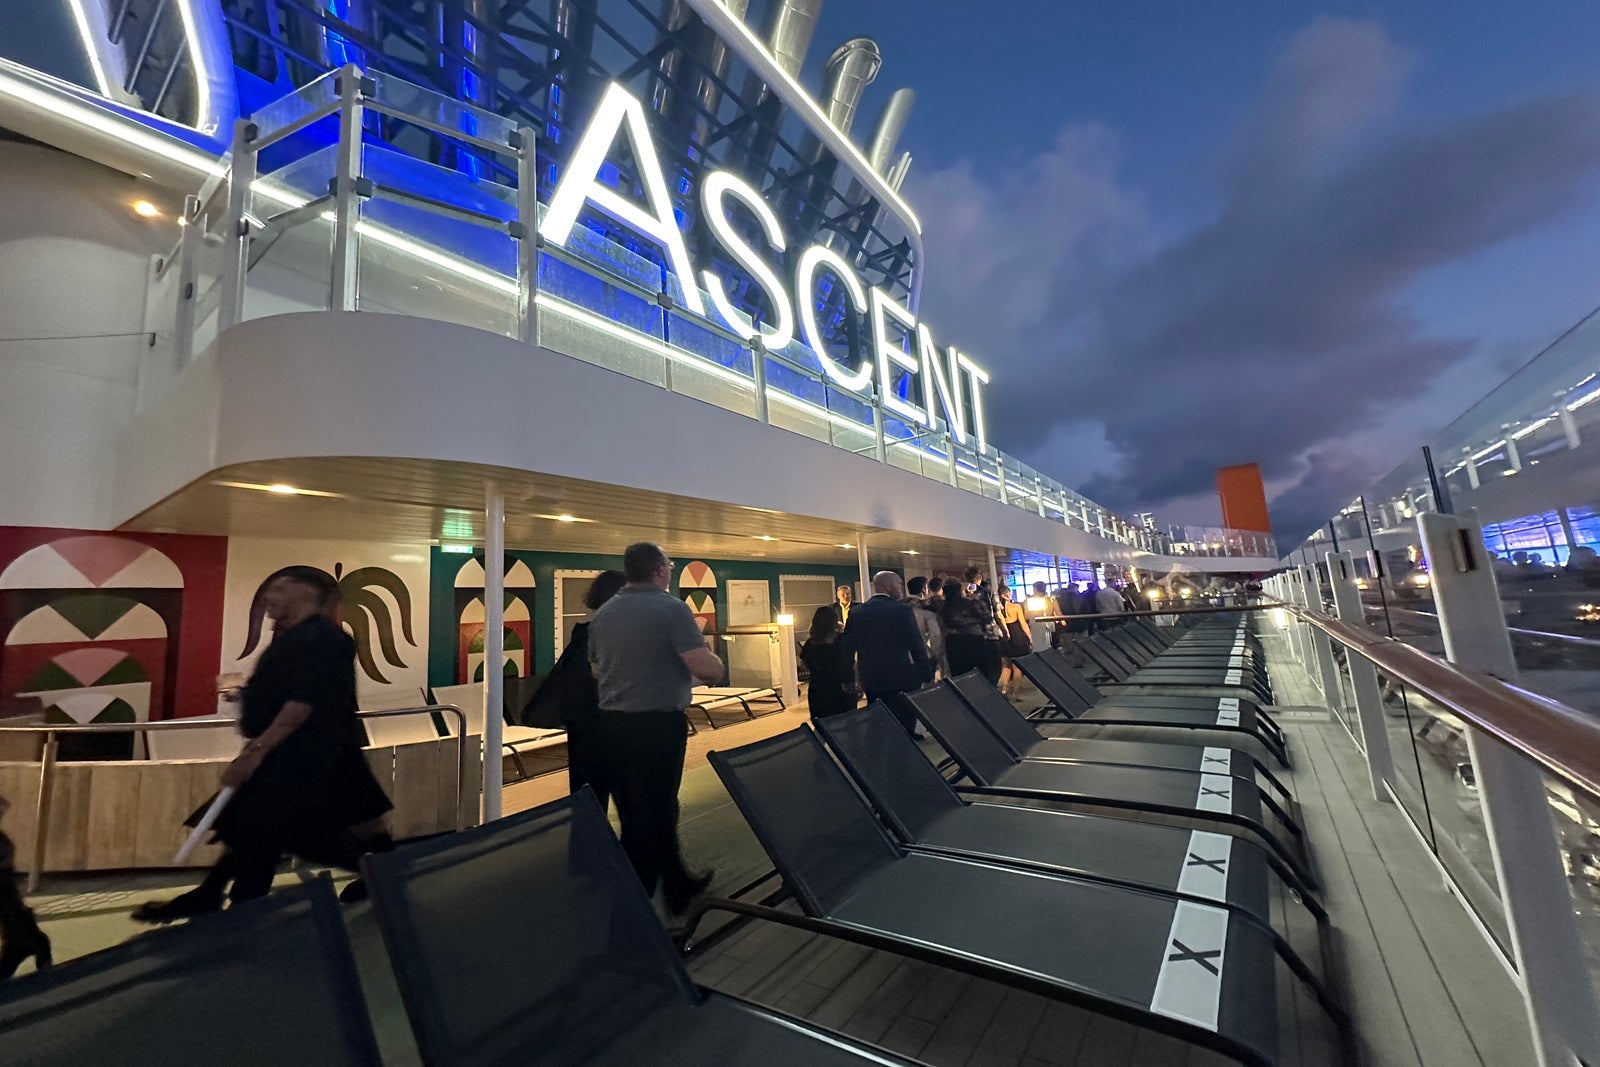 new celebrity cruise ship ascent